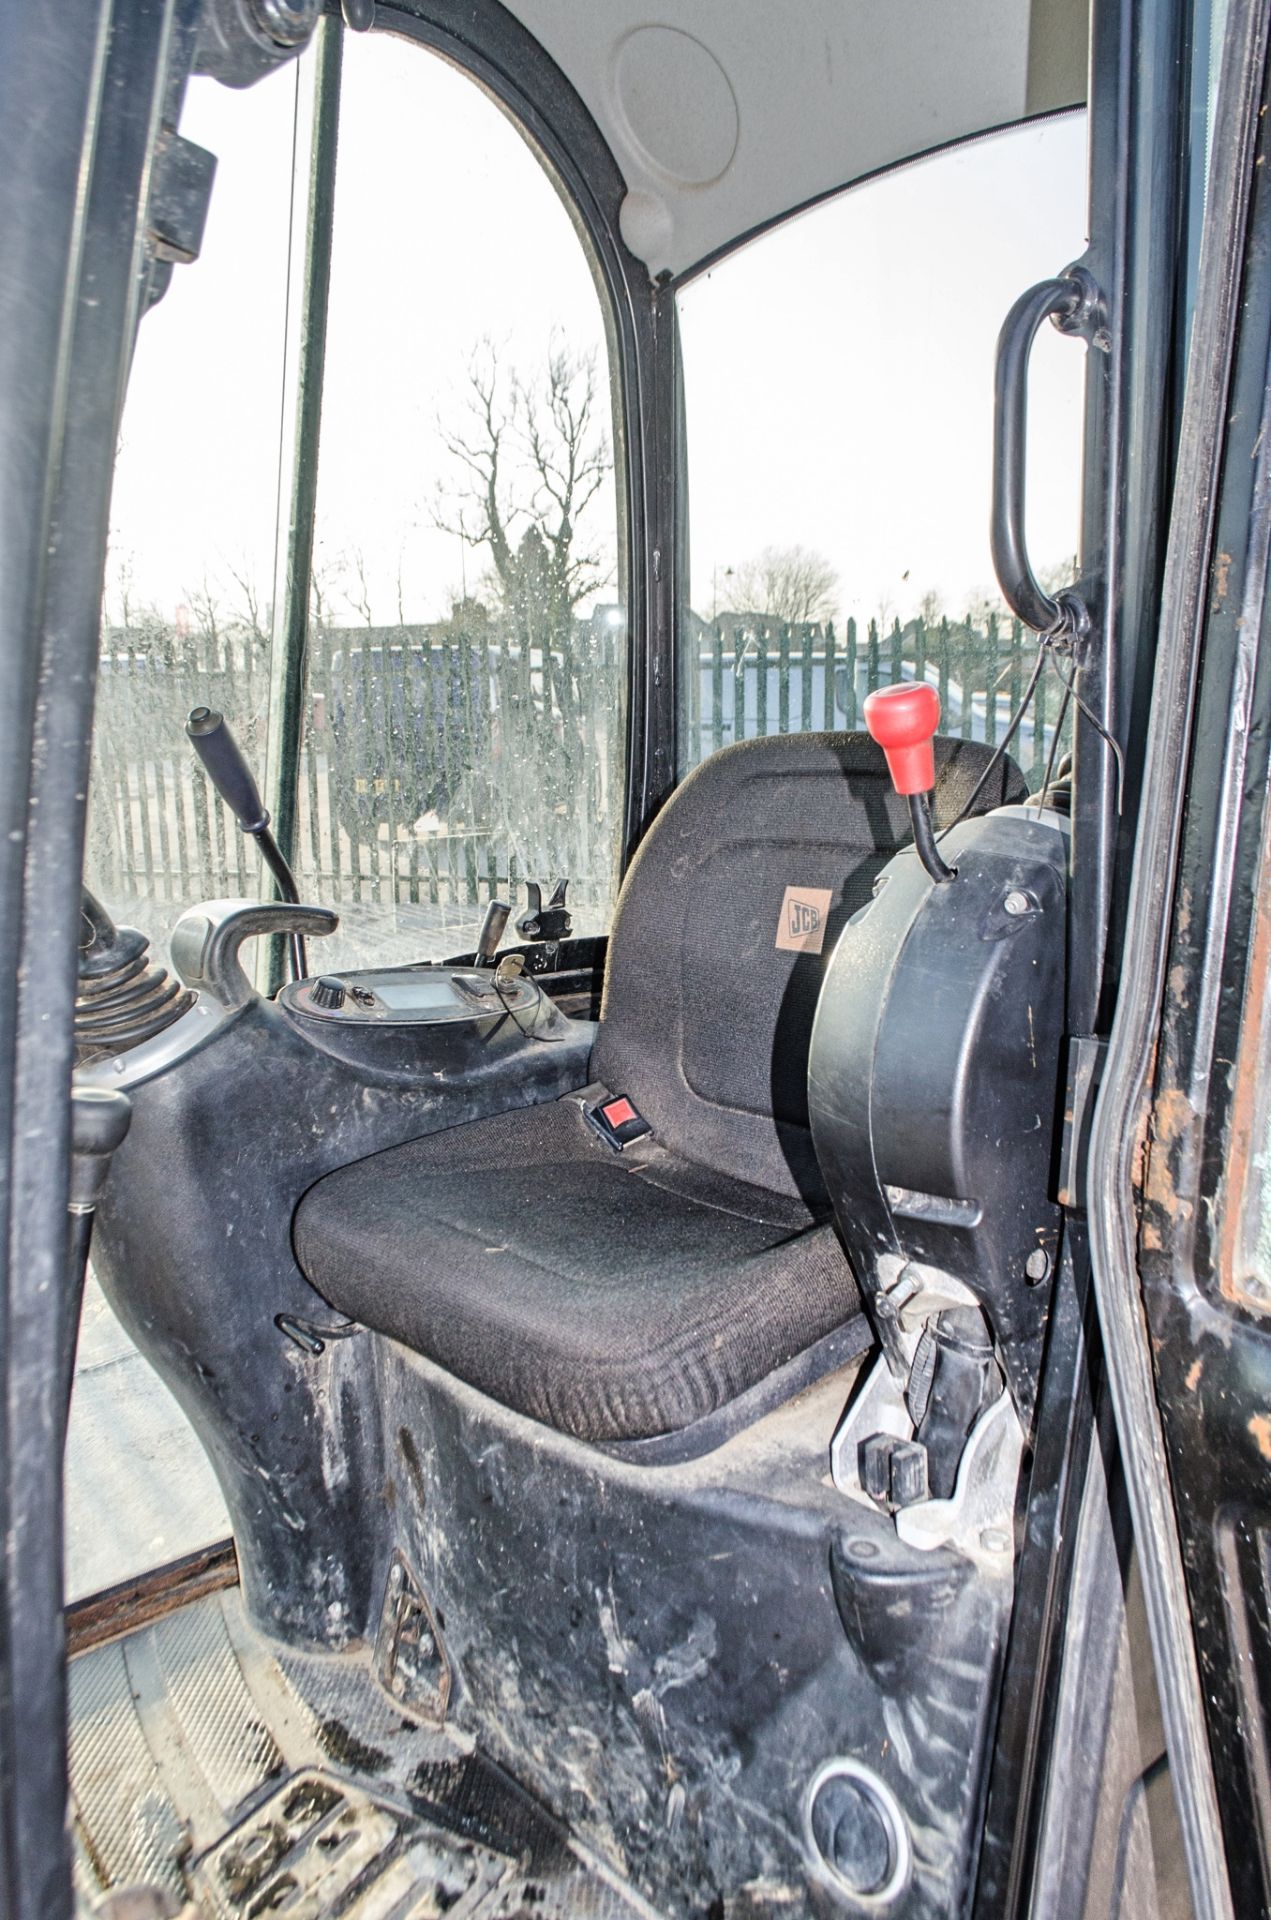 JCB 8018 CTS 1.8 tonne rubber tracked mini excavator Year: 2017 S/N: 2545236 Recorded Hours: 1268 - Image 17 of 21